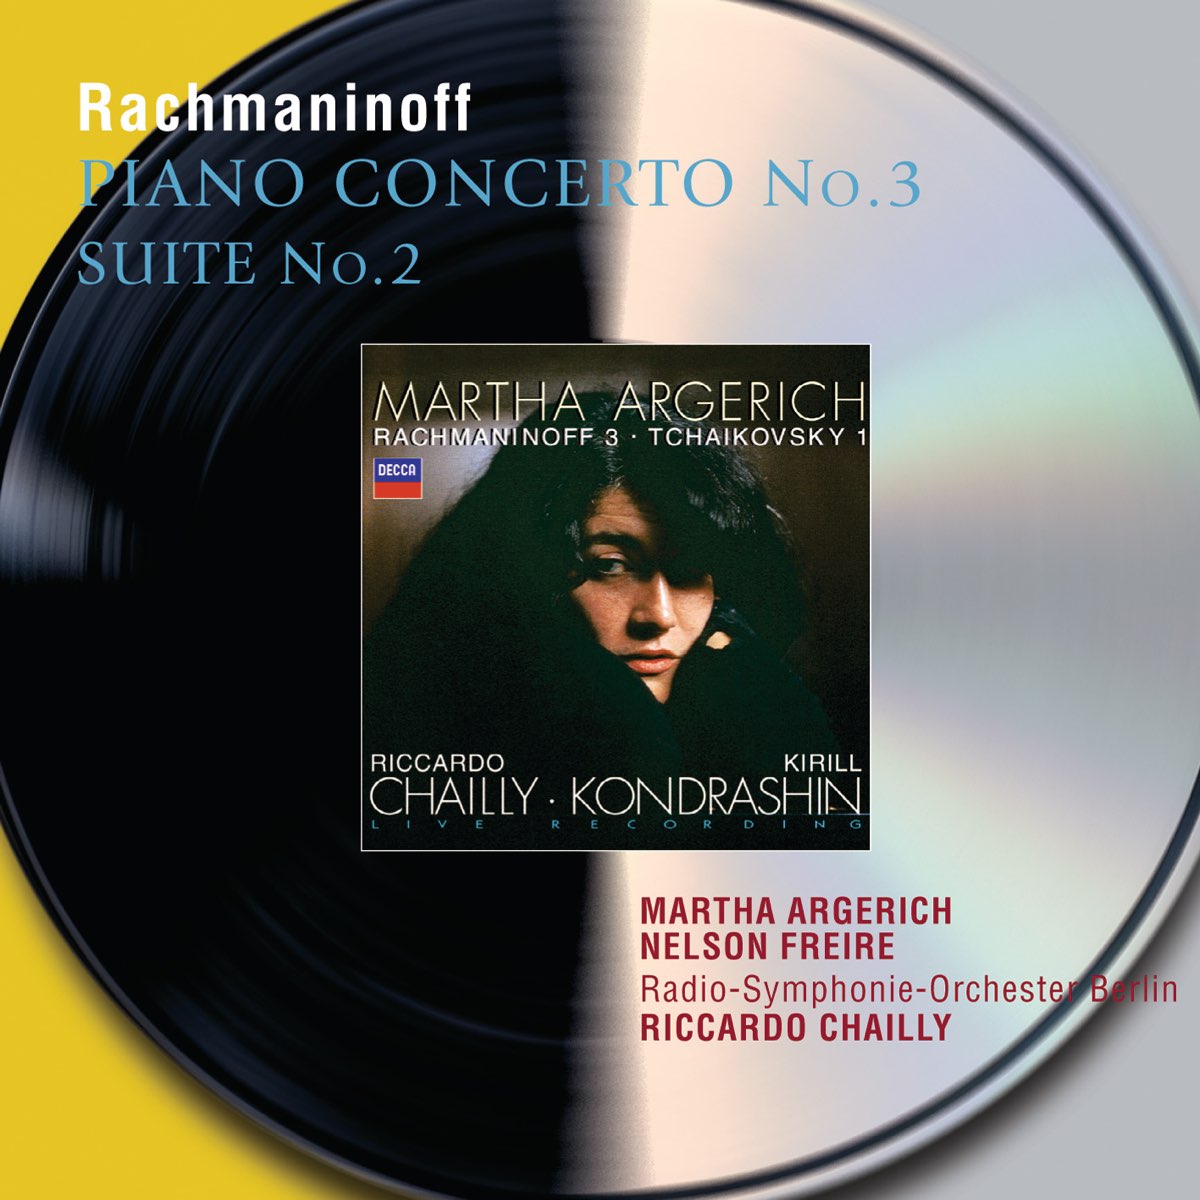 Rachmaninov: Piano Concerto No. 3, Suite No. 2 for 2 Pianos - Album by  Martha Argerich, Nelson Freire, Radio-Symphonie-Orchester Berlin & Riccardo  Chailly - Apple Music